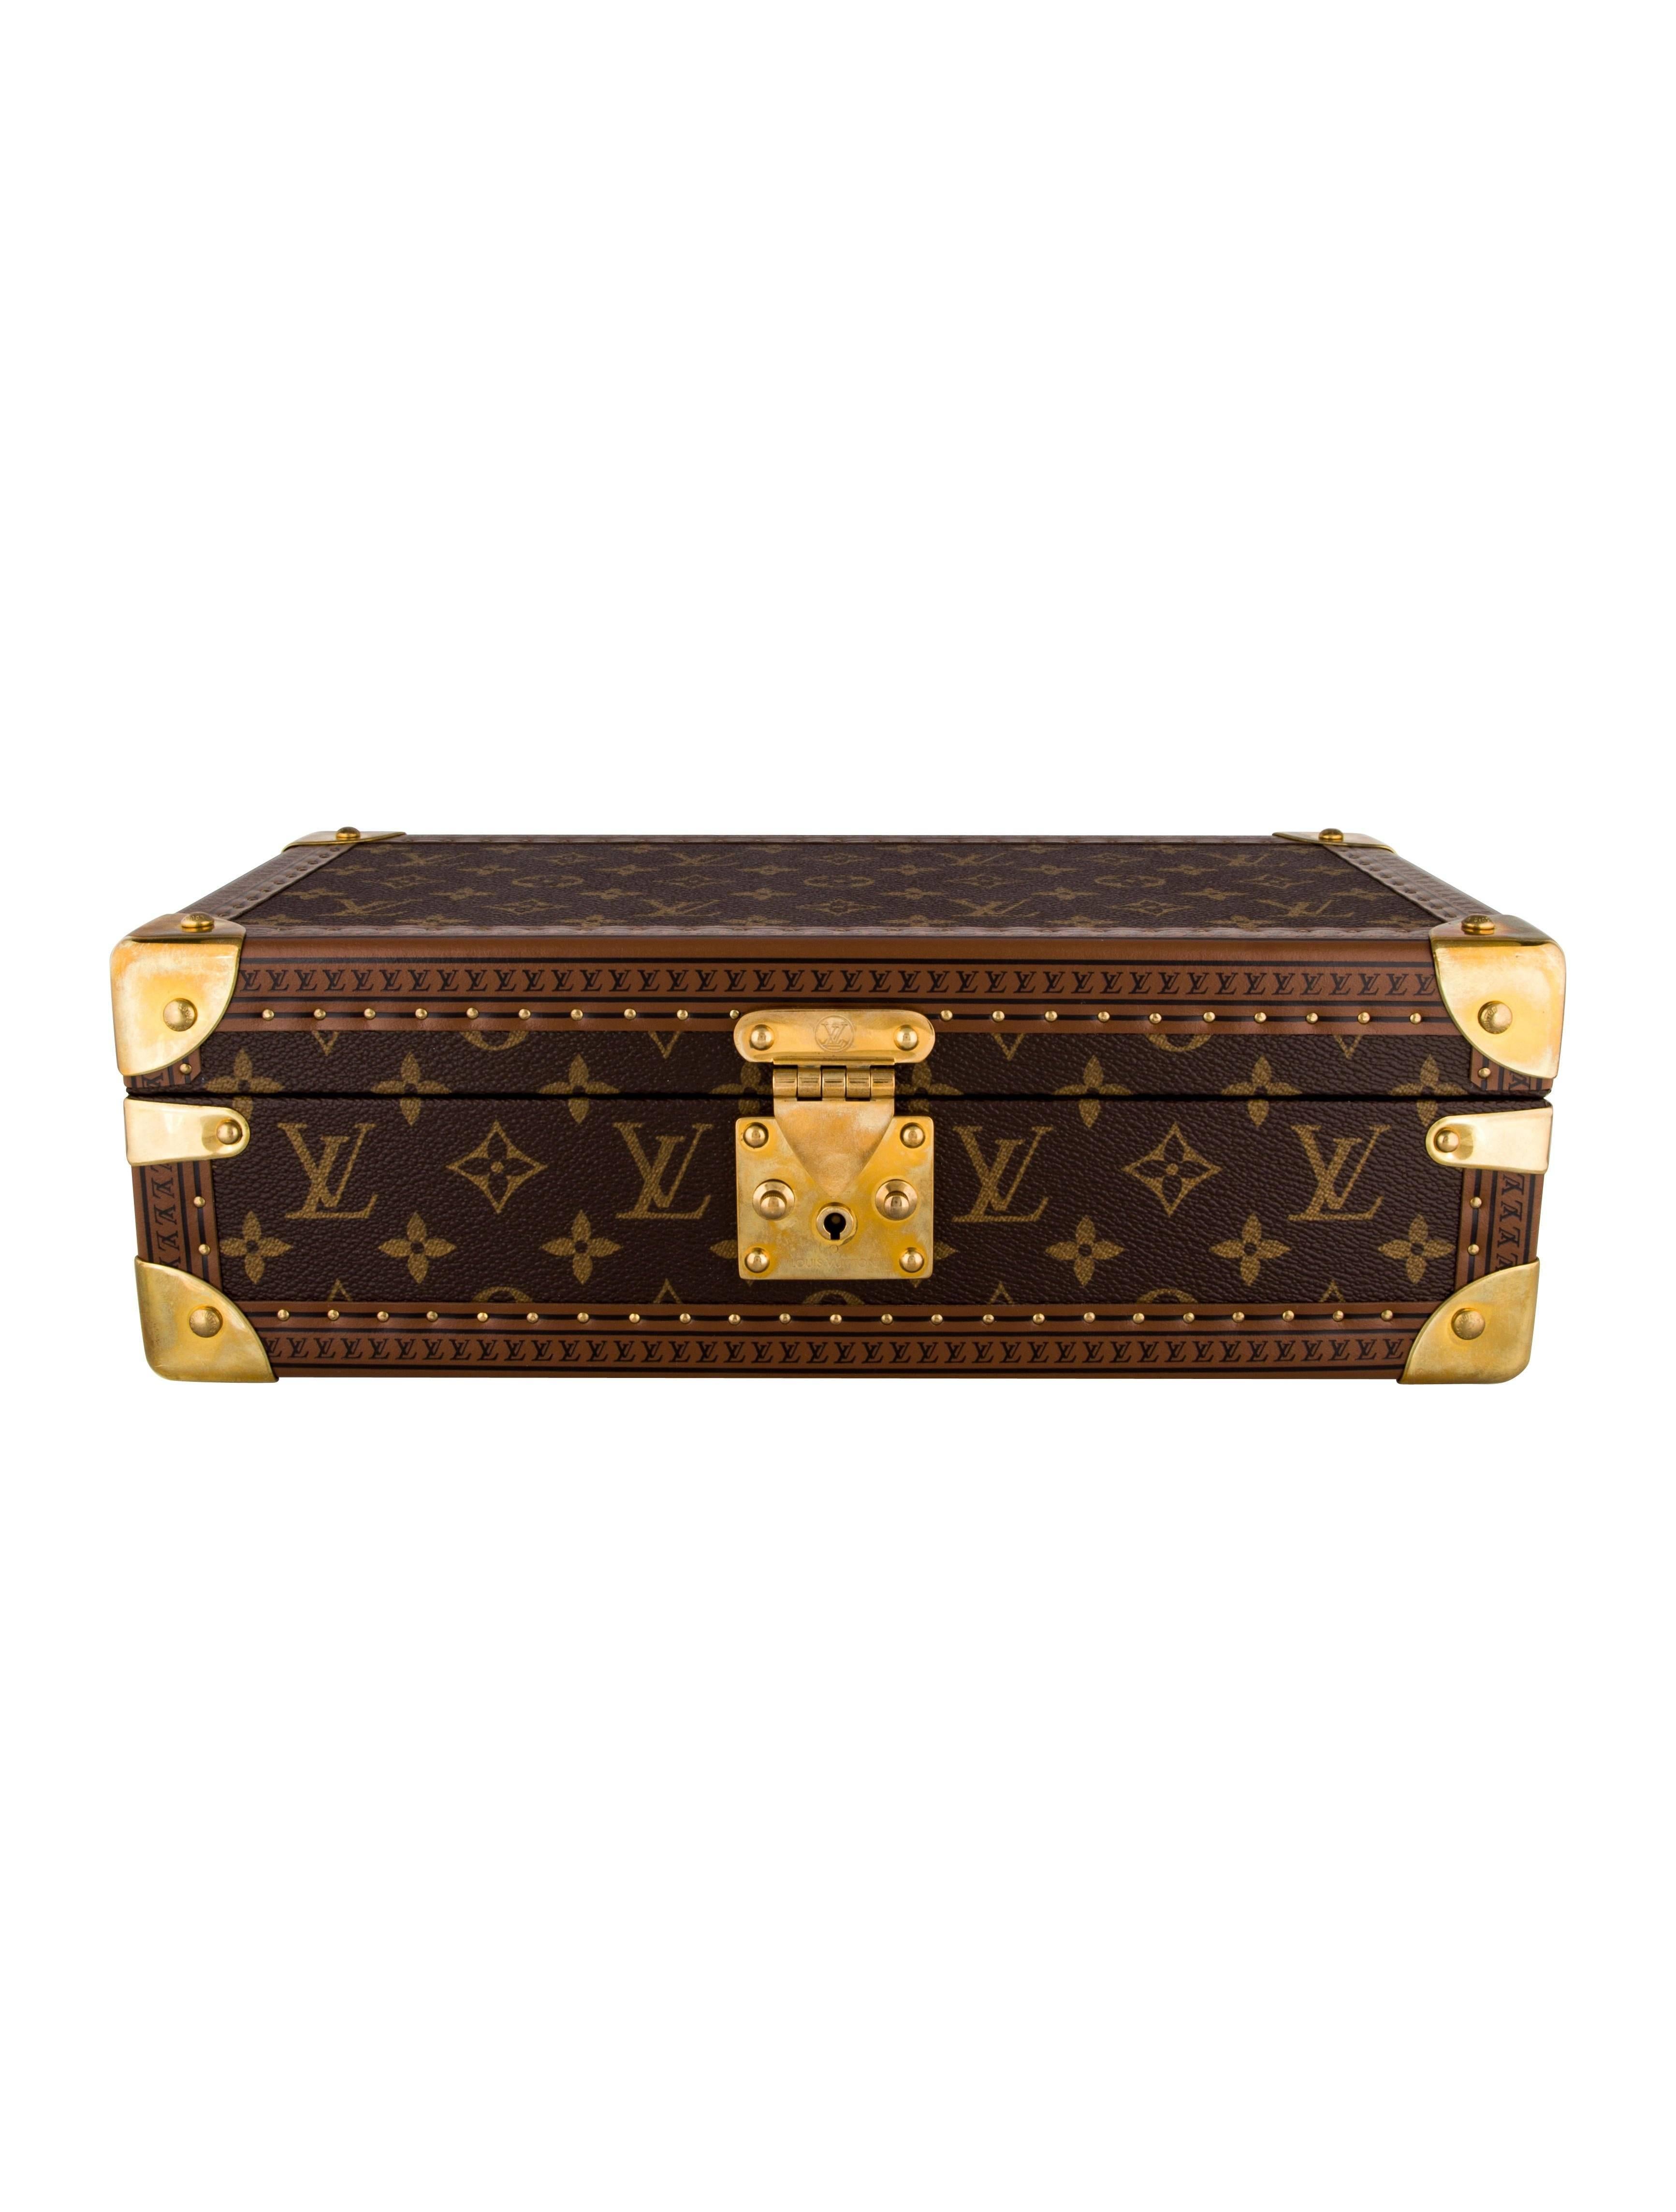 CURATOR'S NOTES

Louis Vuitton Monogram Men's Women's Watch Storage Travel Case with Keys
Monogram canvas
Leather trim
Gold tone brass hardware
Alcanta lining
S-lock closure 
Date code AS5029
Features removable tray and eight slots
Made in